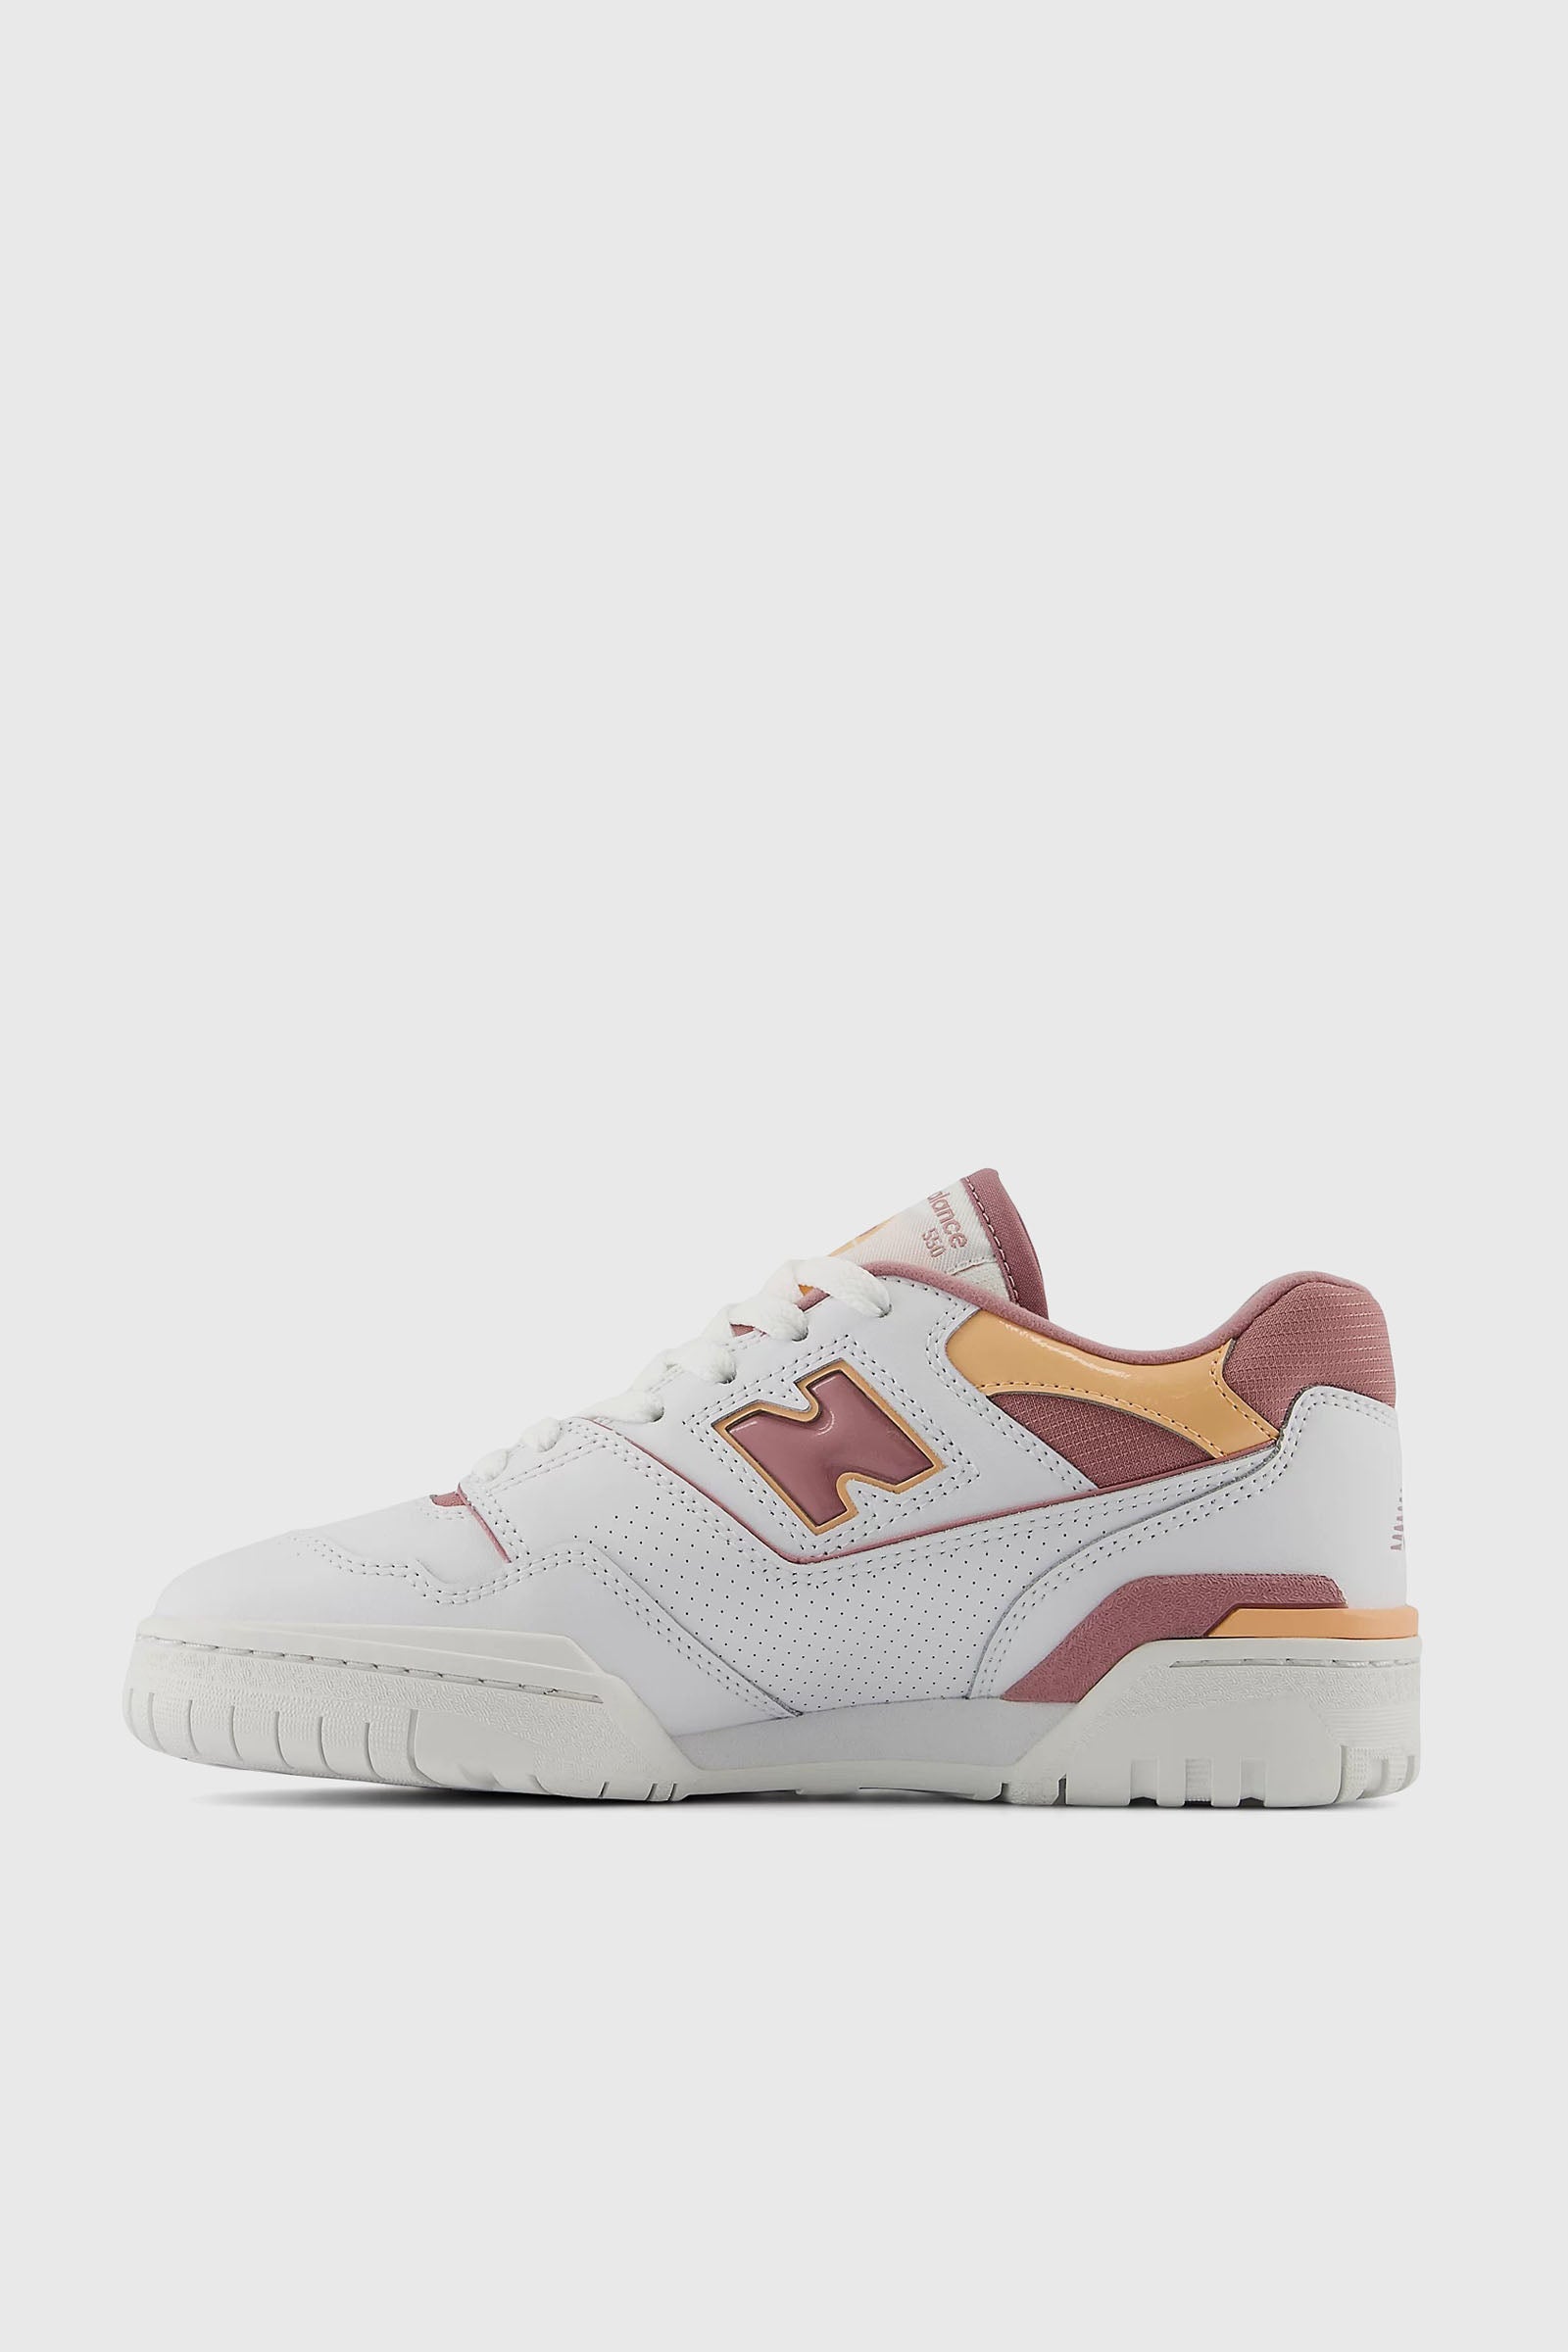 New Balance Sneaker 550 Leather White/Pink - 5